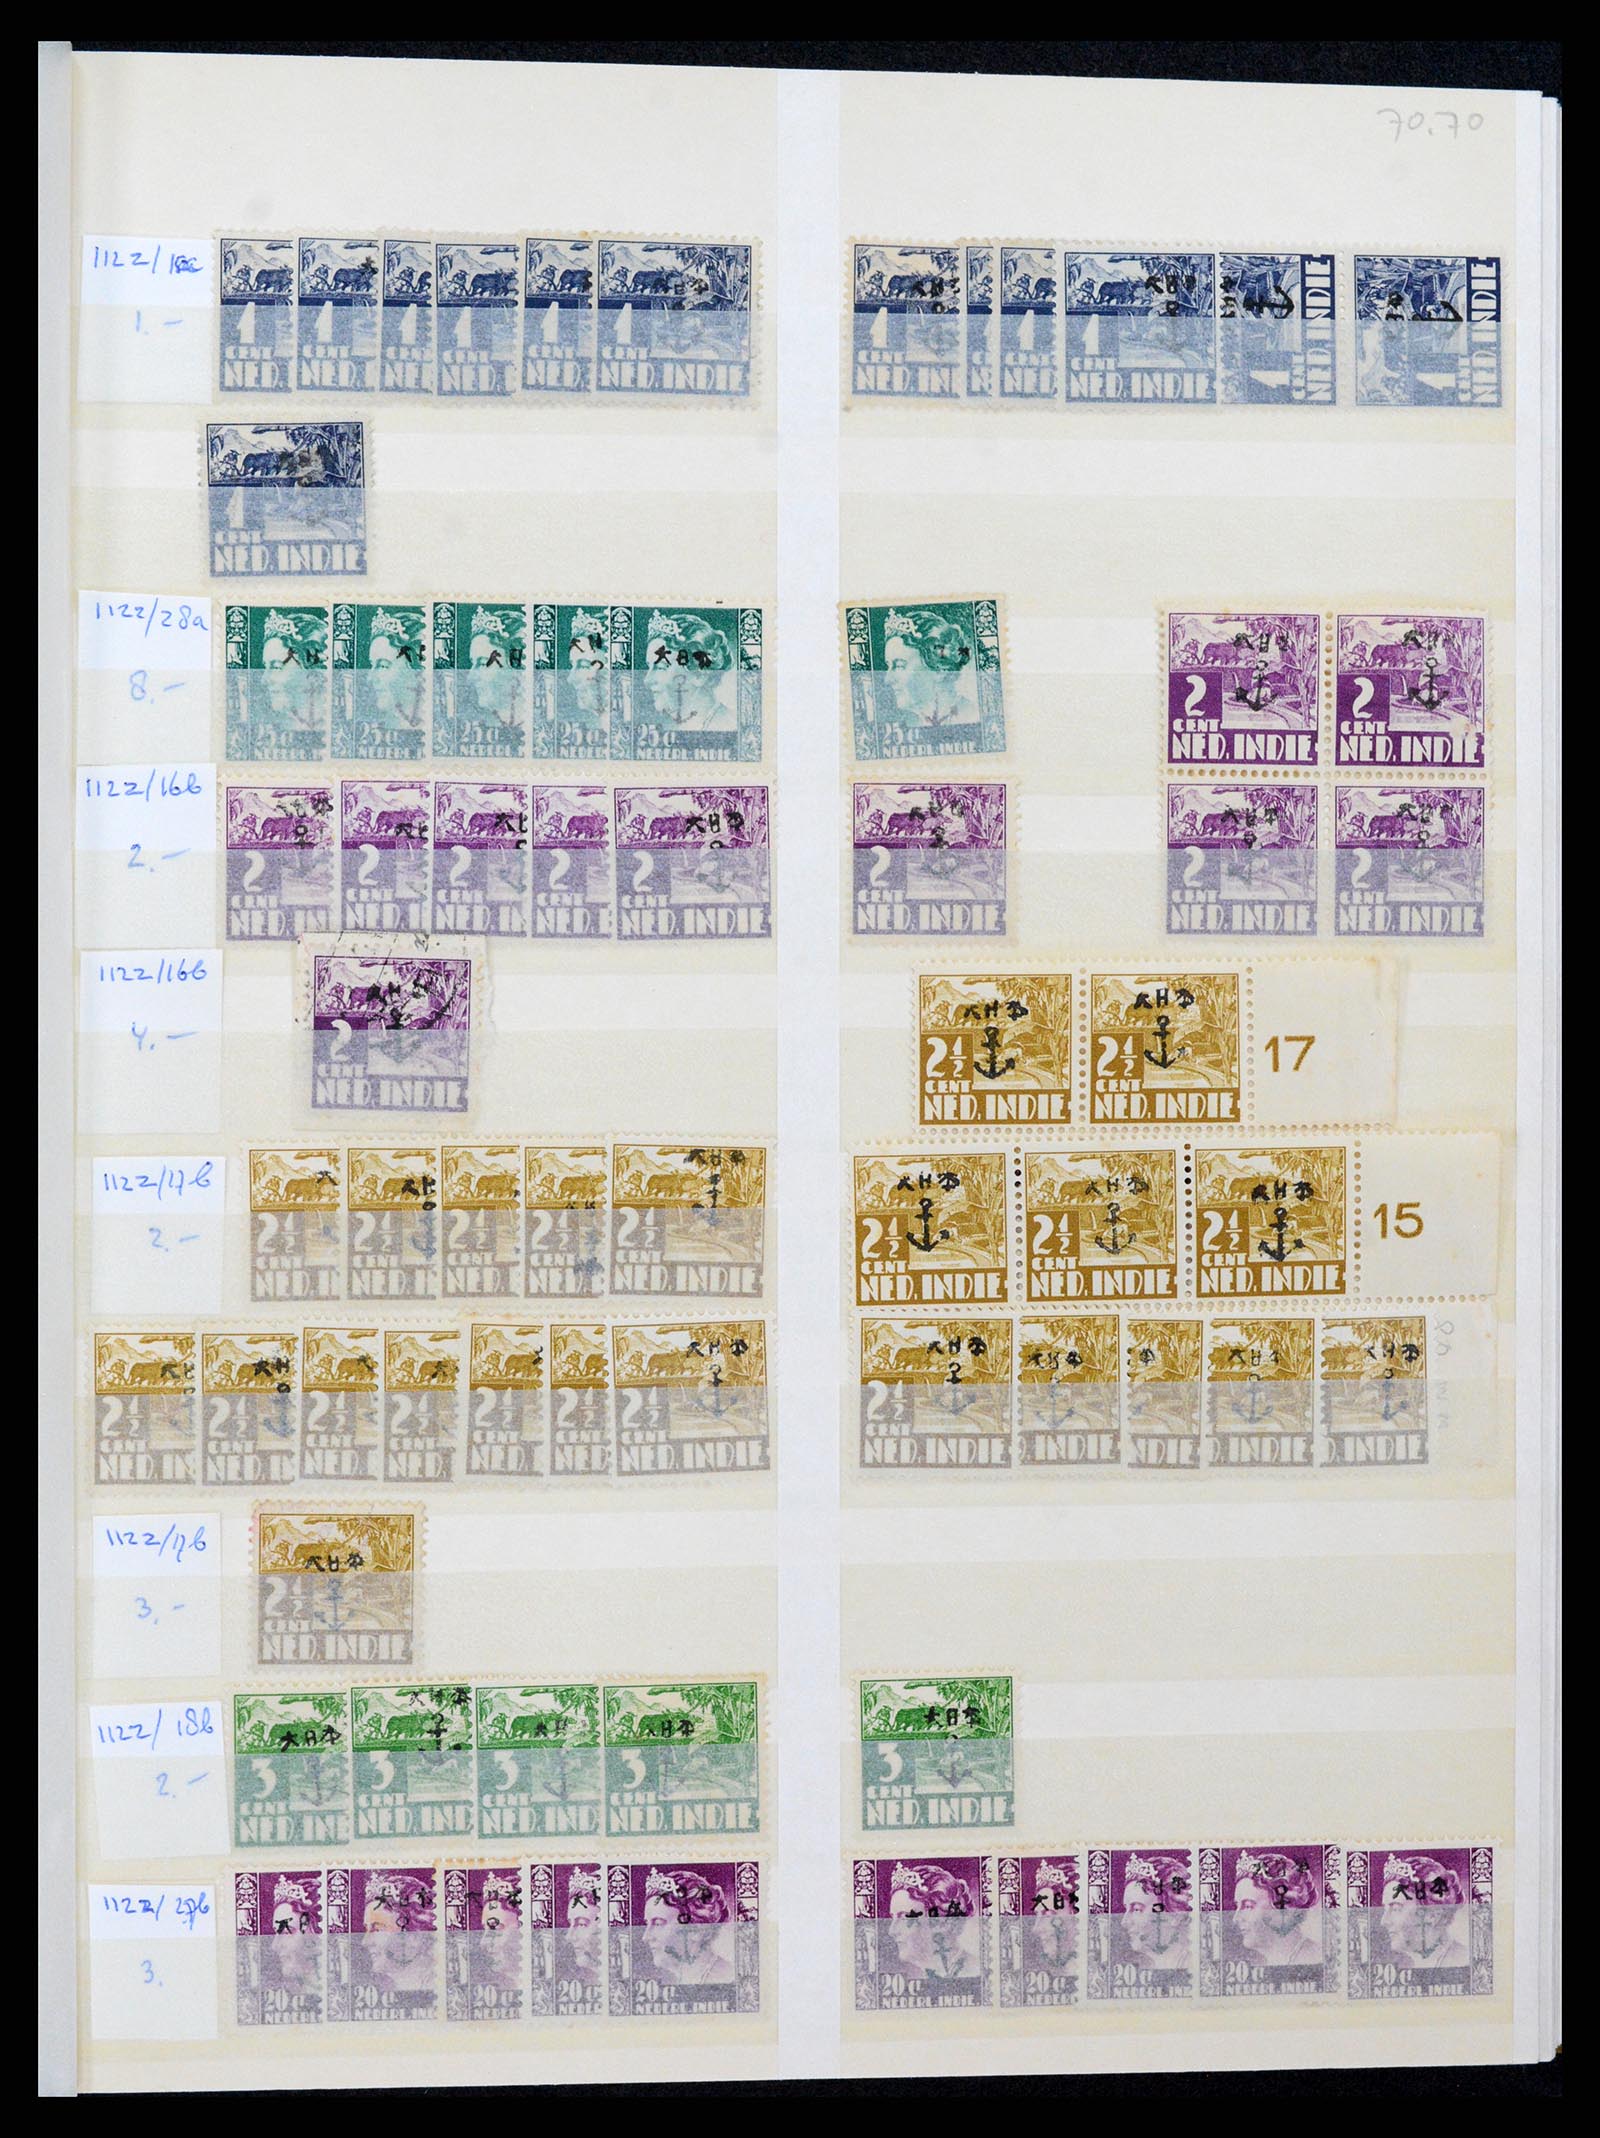 37429 017 - Stamp collection 37429 Japanese occupation Dutch East Indies 1942-1945.